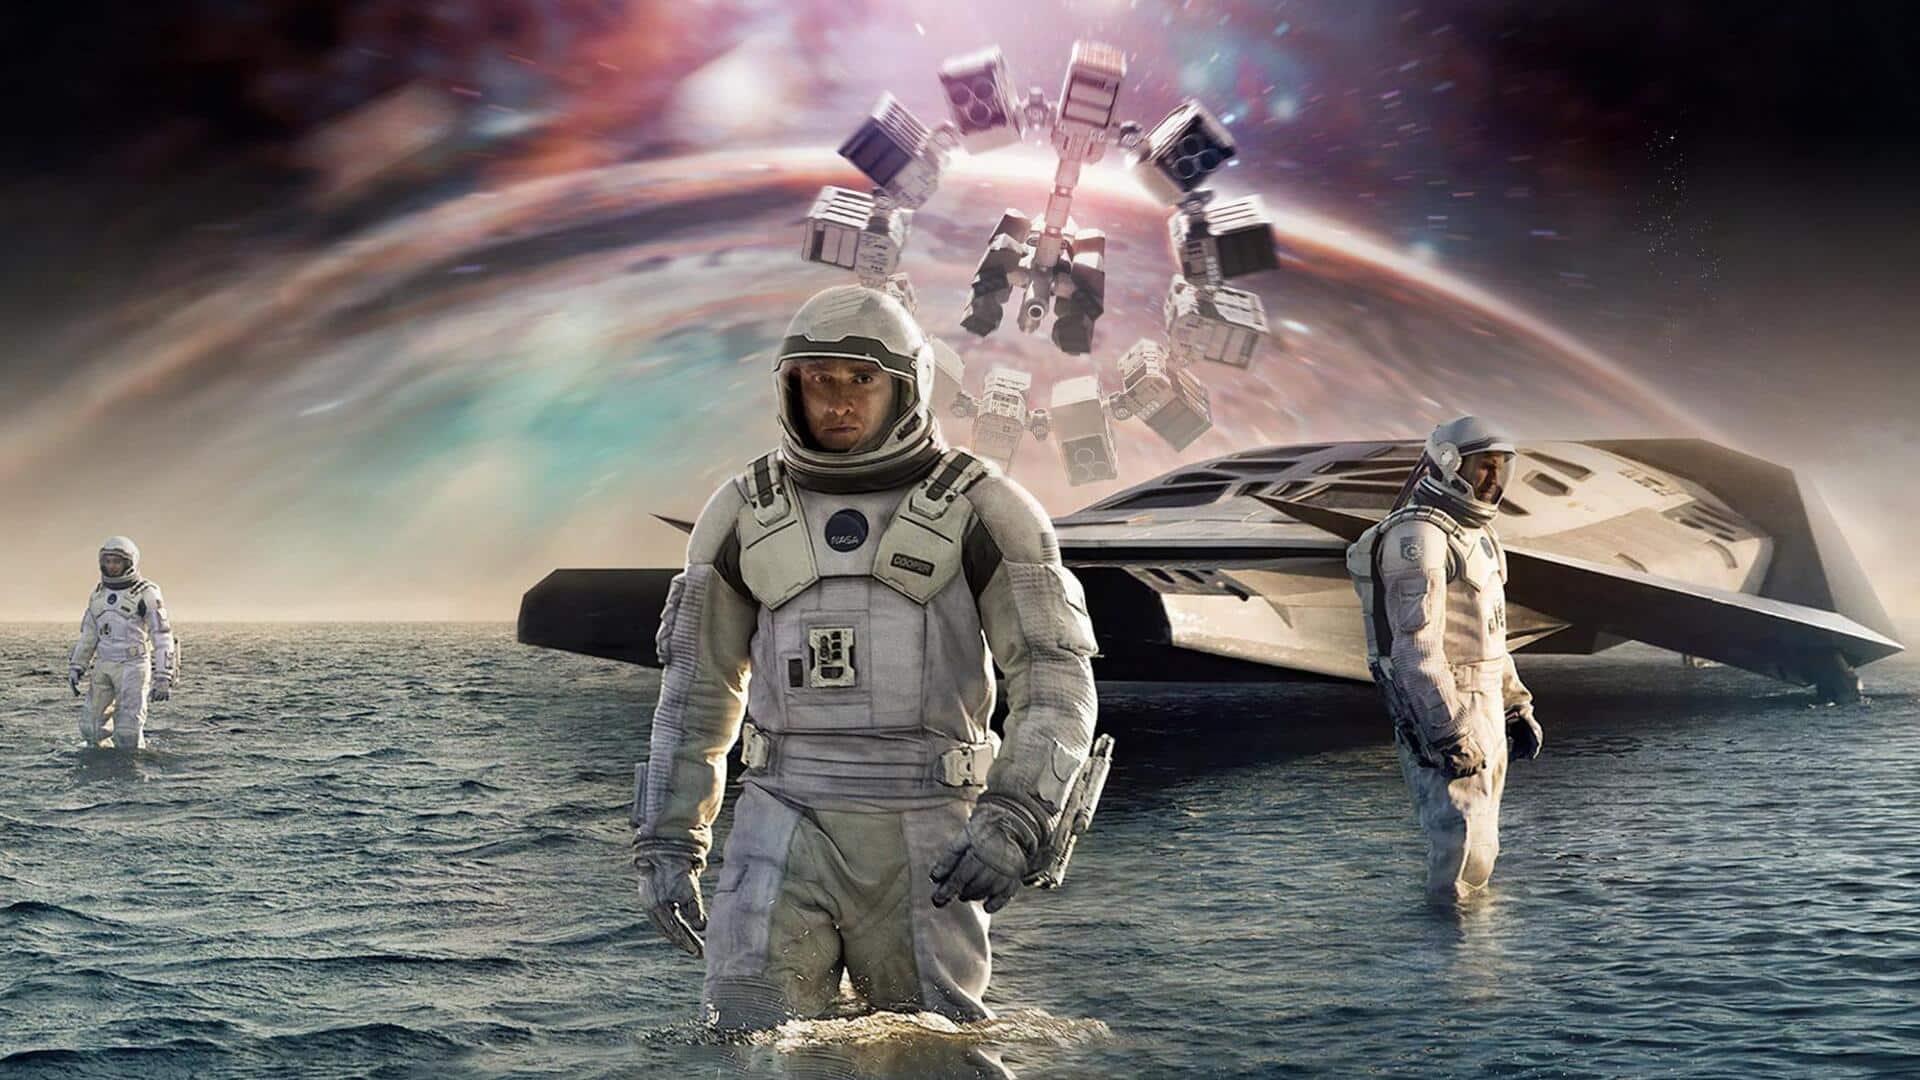 Christopher Nolan's 'Interstellar' to return to theaters for 10th anniversary